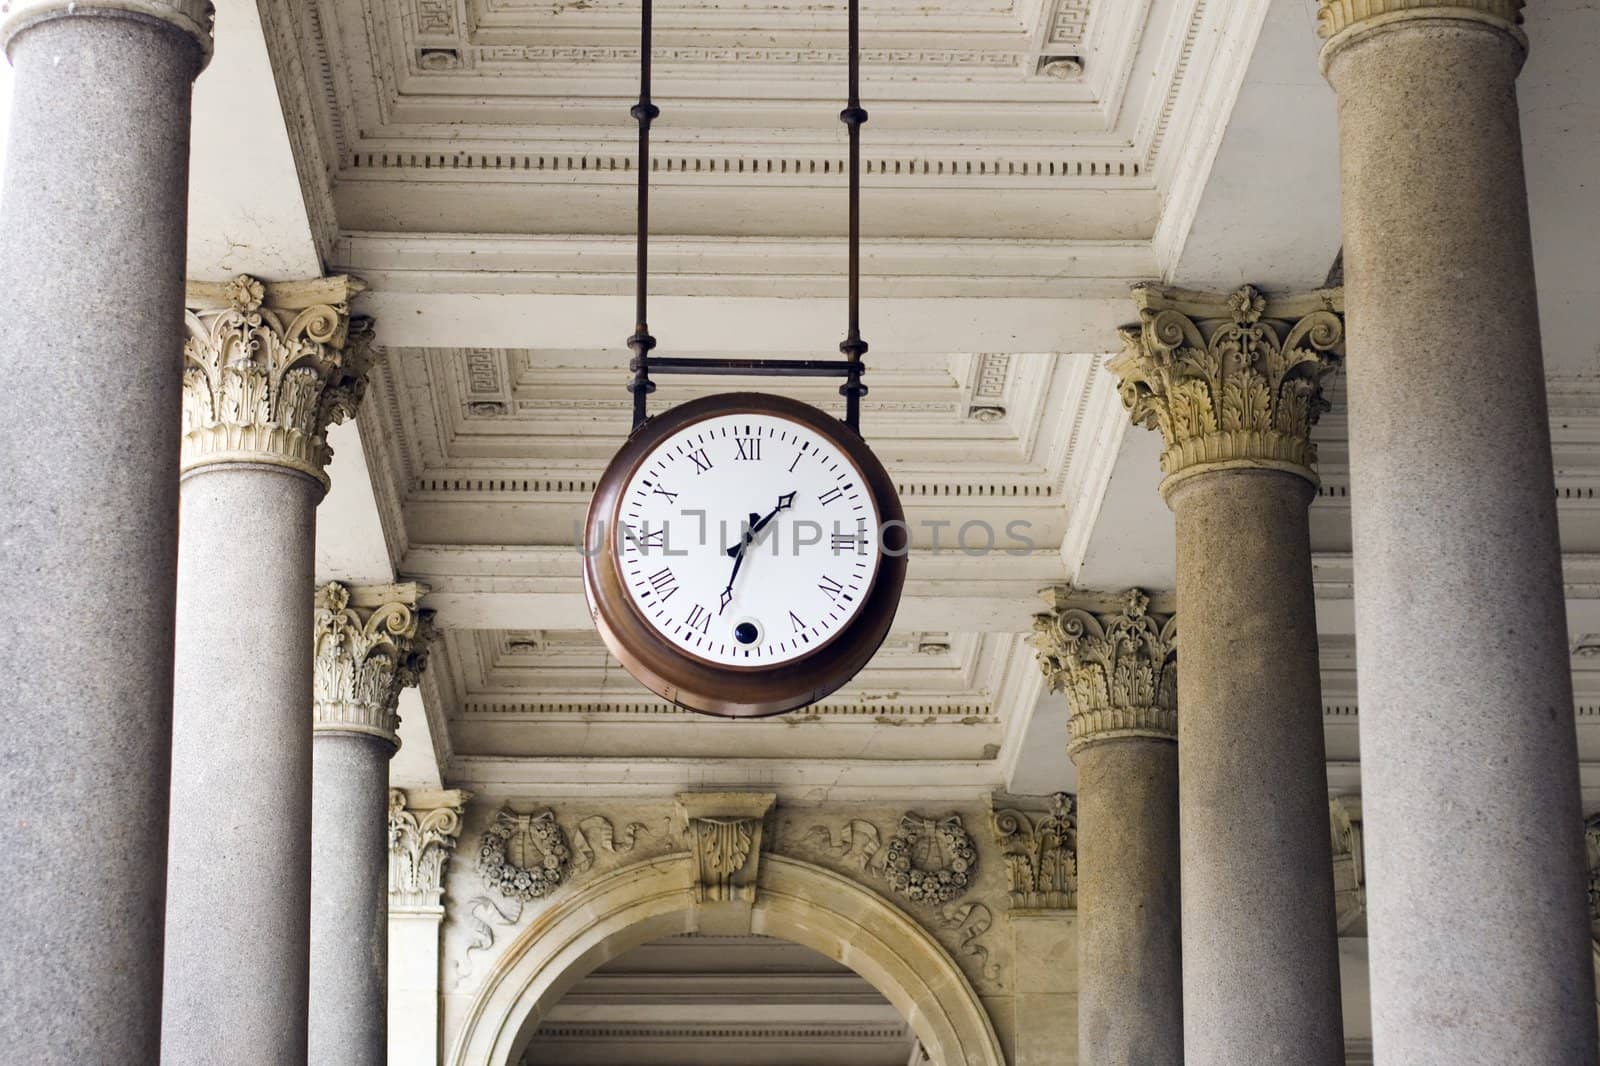 a clock hanging among pillars in the spa colonnade